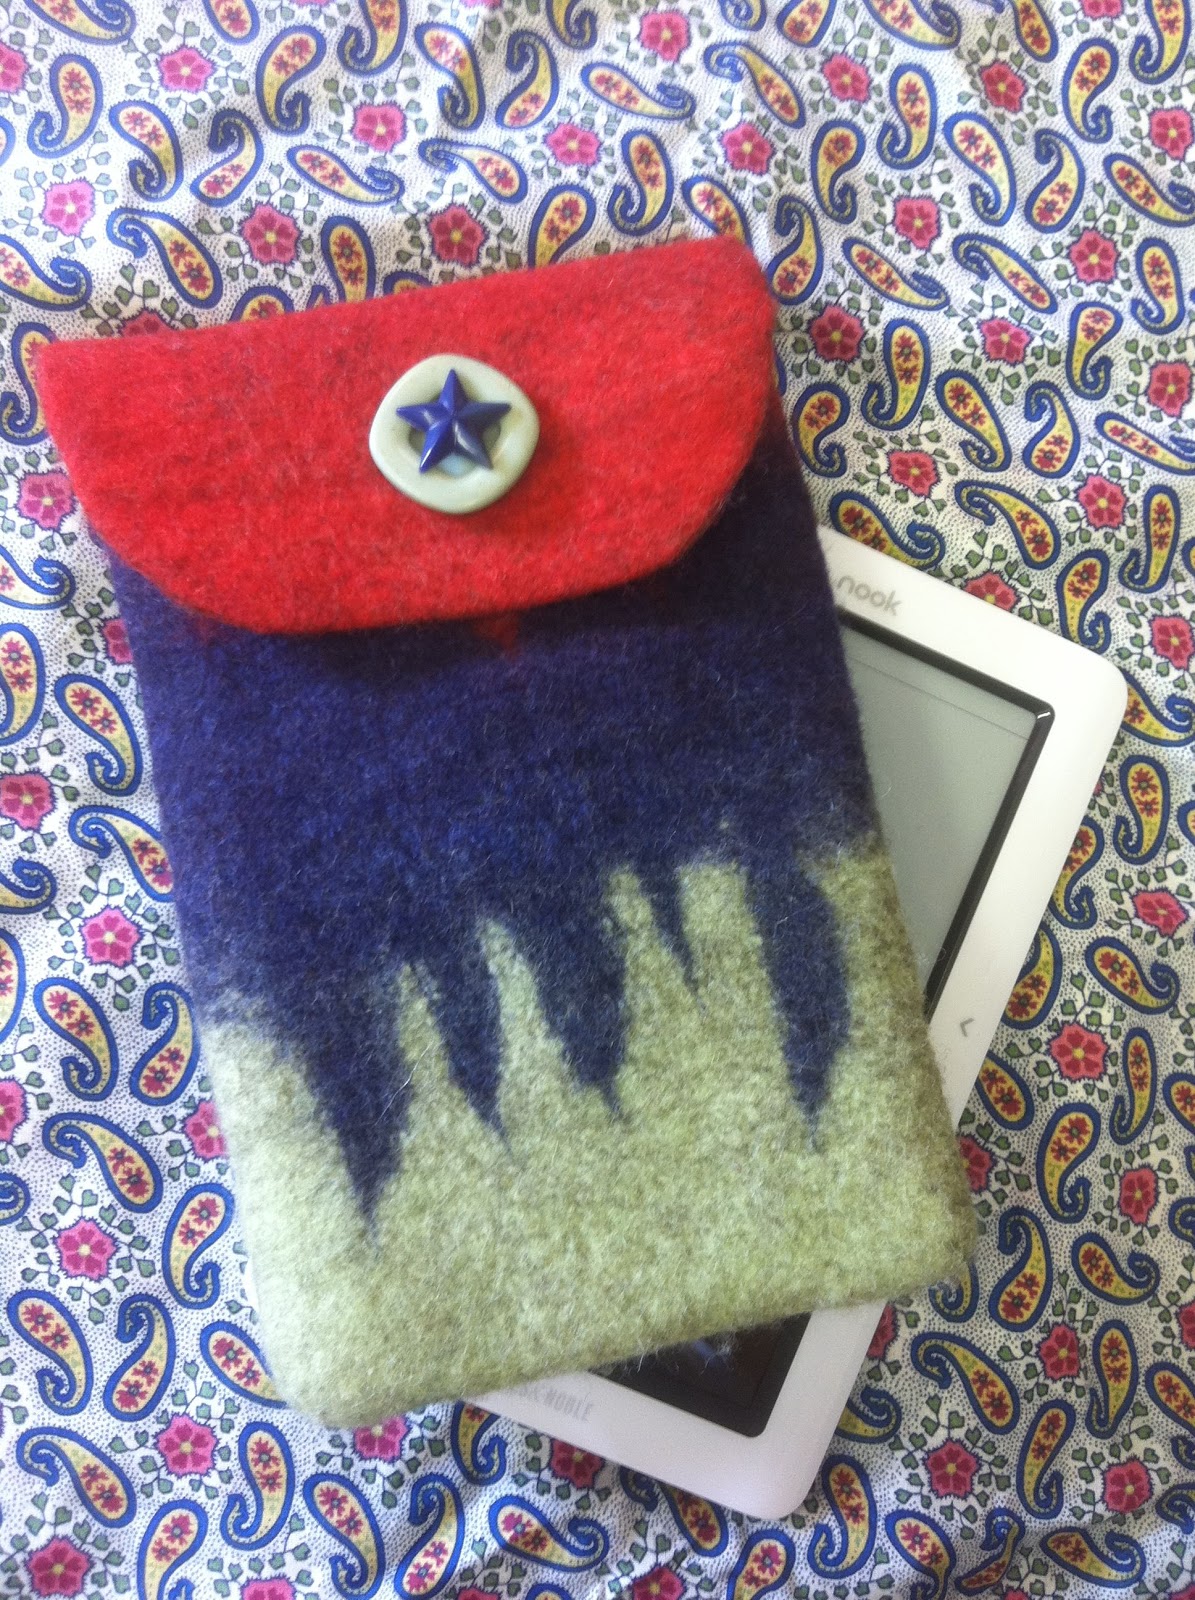 Felt and Soul: Nook sleeves